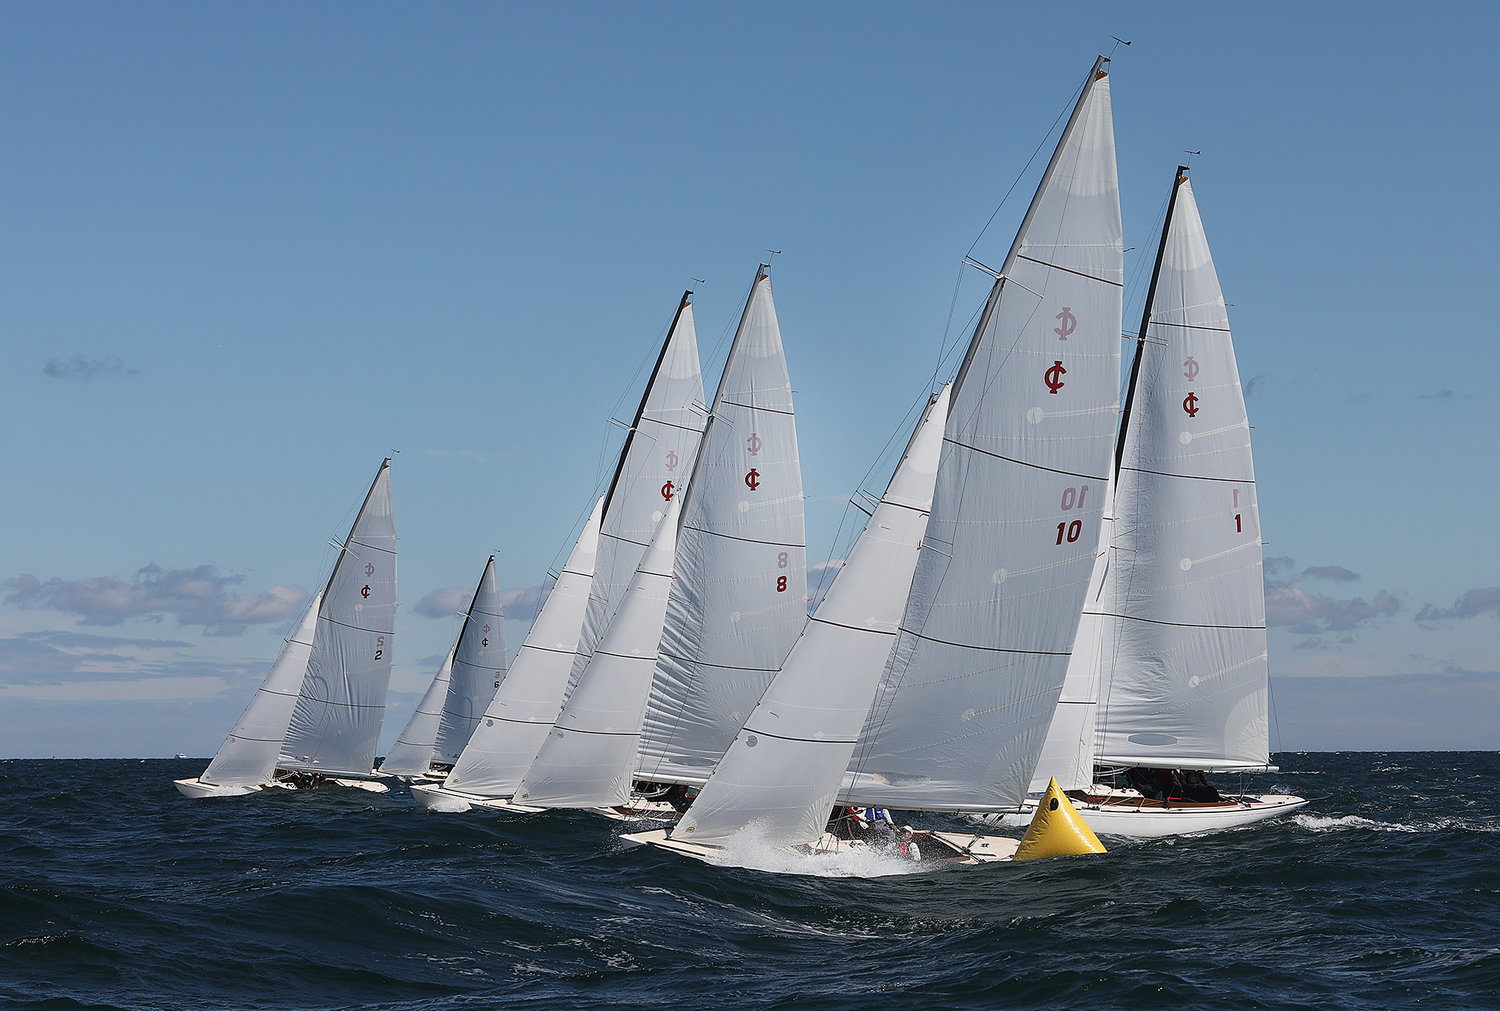 AUGUST 18, 2022 -- Nantucket Race Week. Day 6. Boats round a marker during the International One Design Celebrity Invitational in Nantucket Sound on Thursday. Photo by Ray K. Saunders